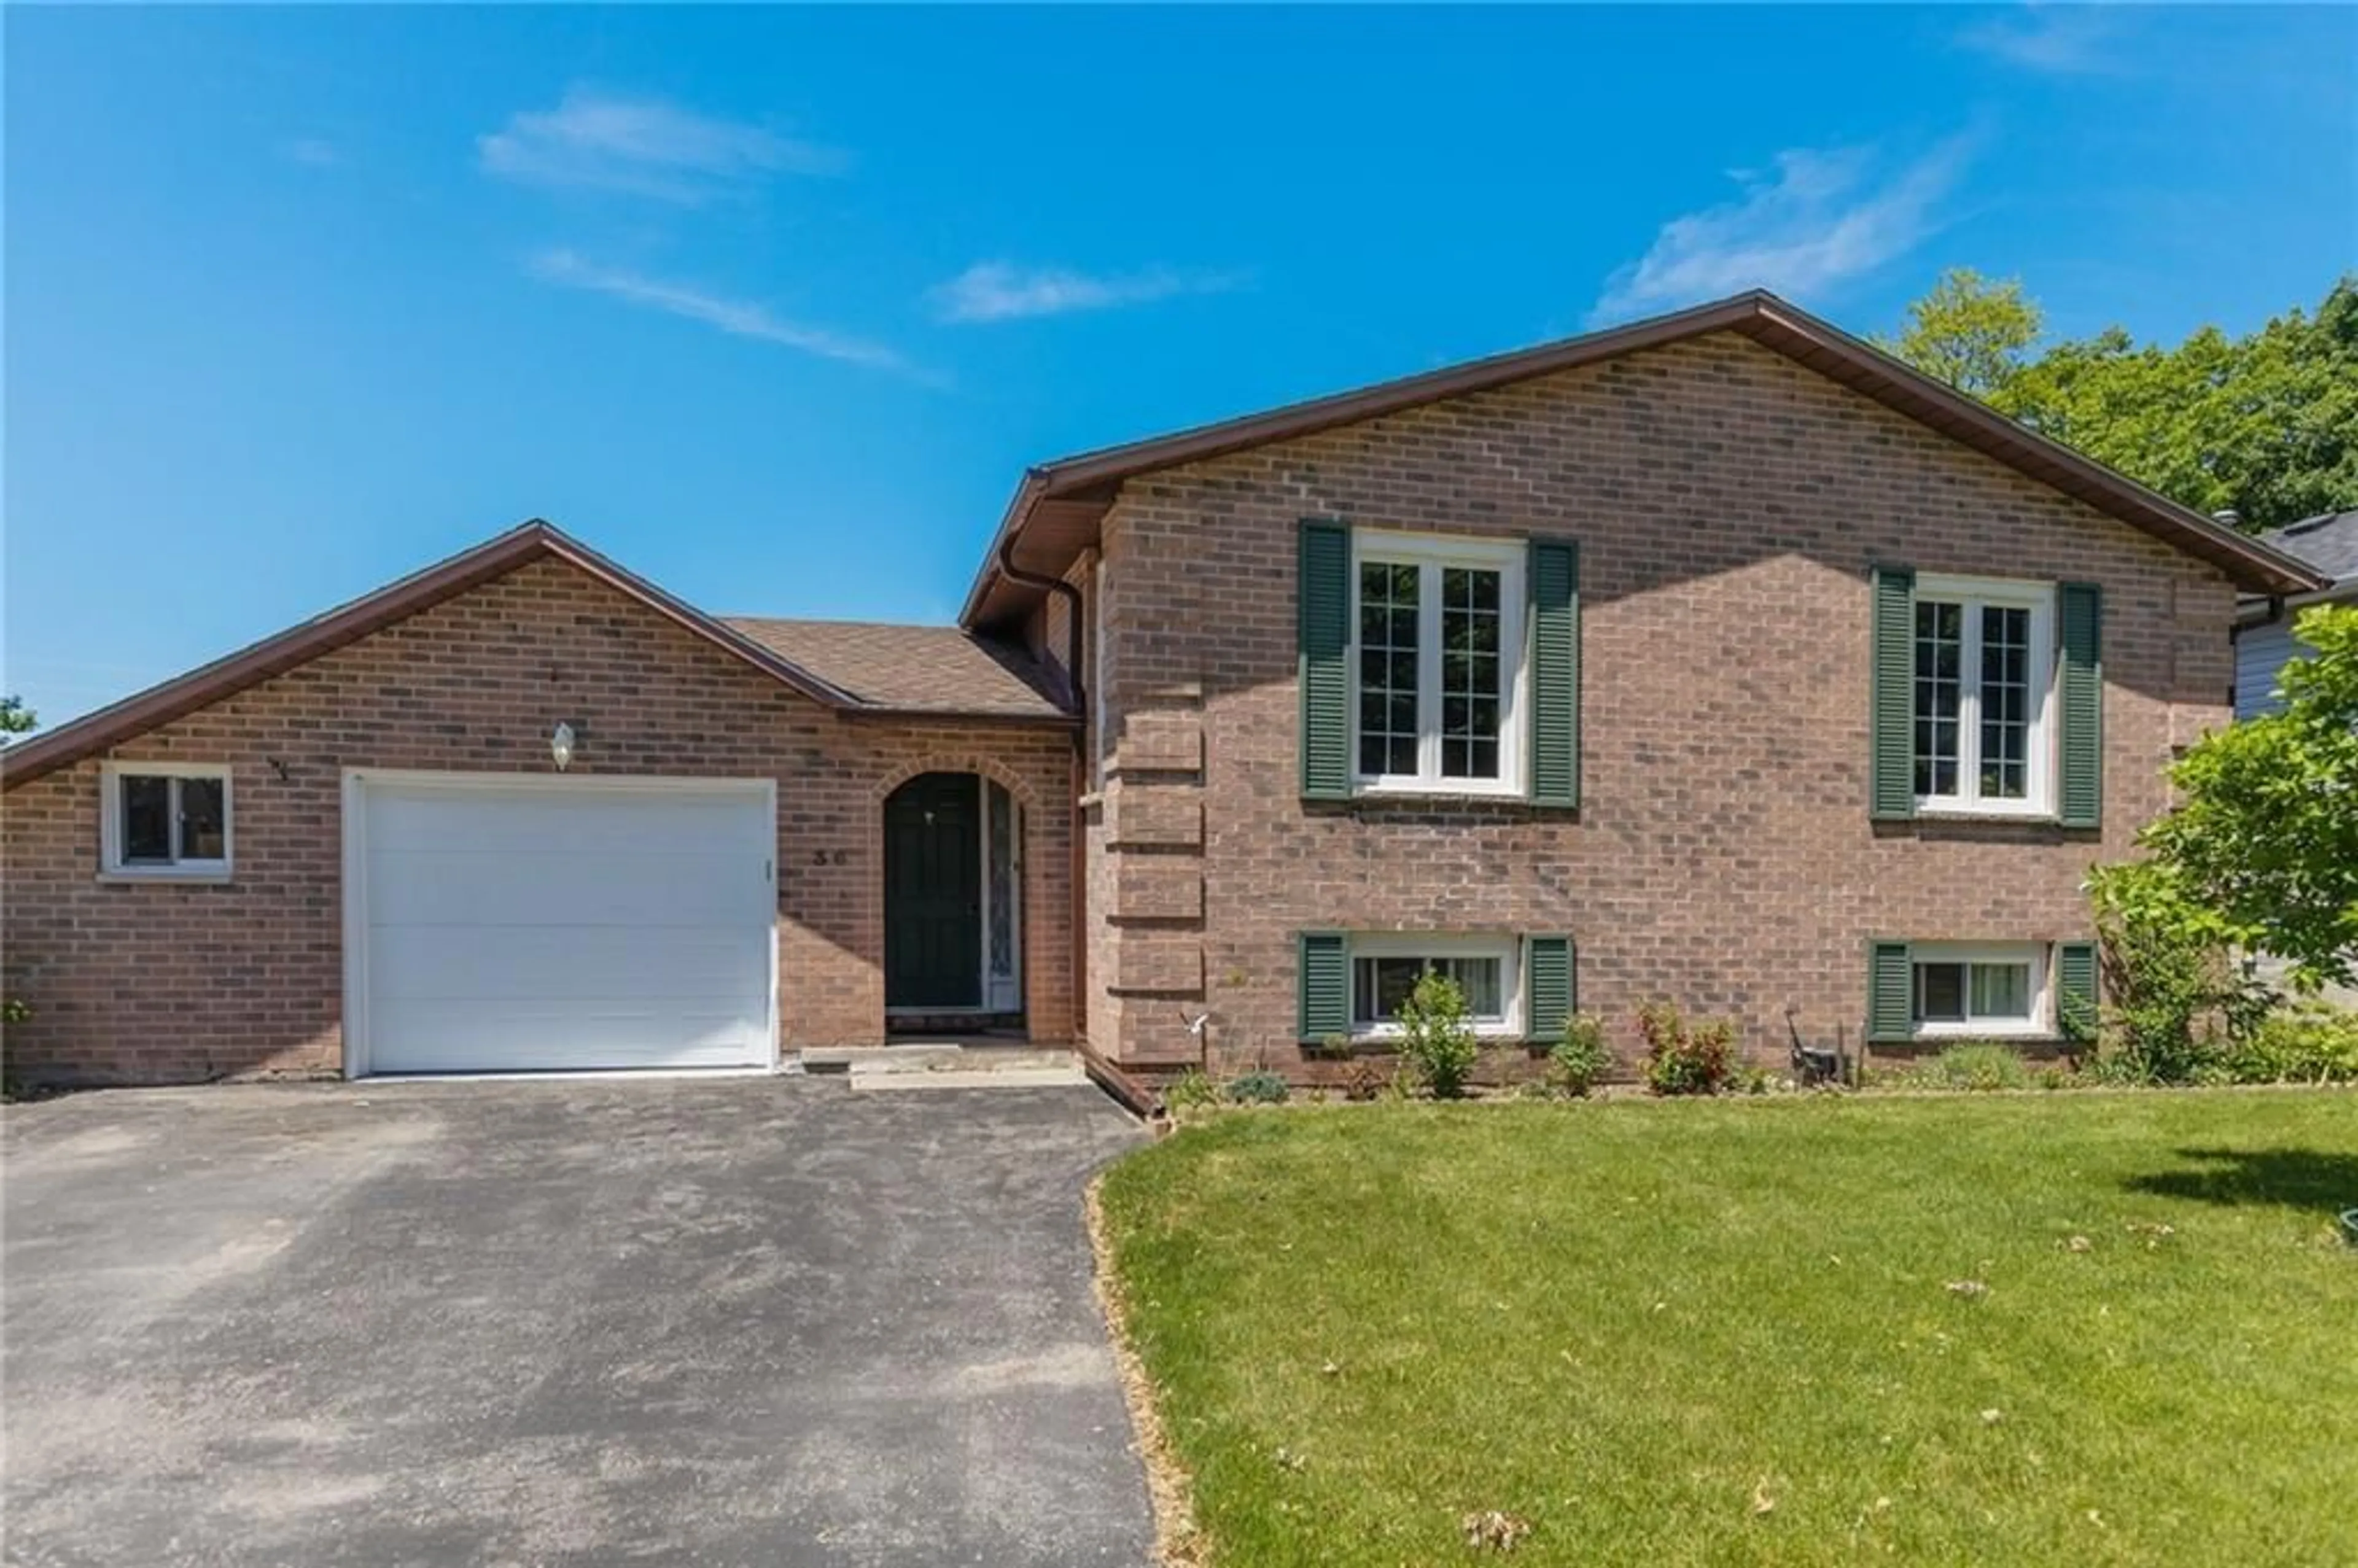 Home with brick exterior material for 36 CAMBRIDGE Cres, Brockville Ontario K6V 6L8